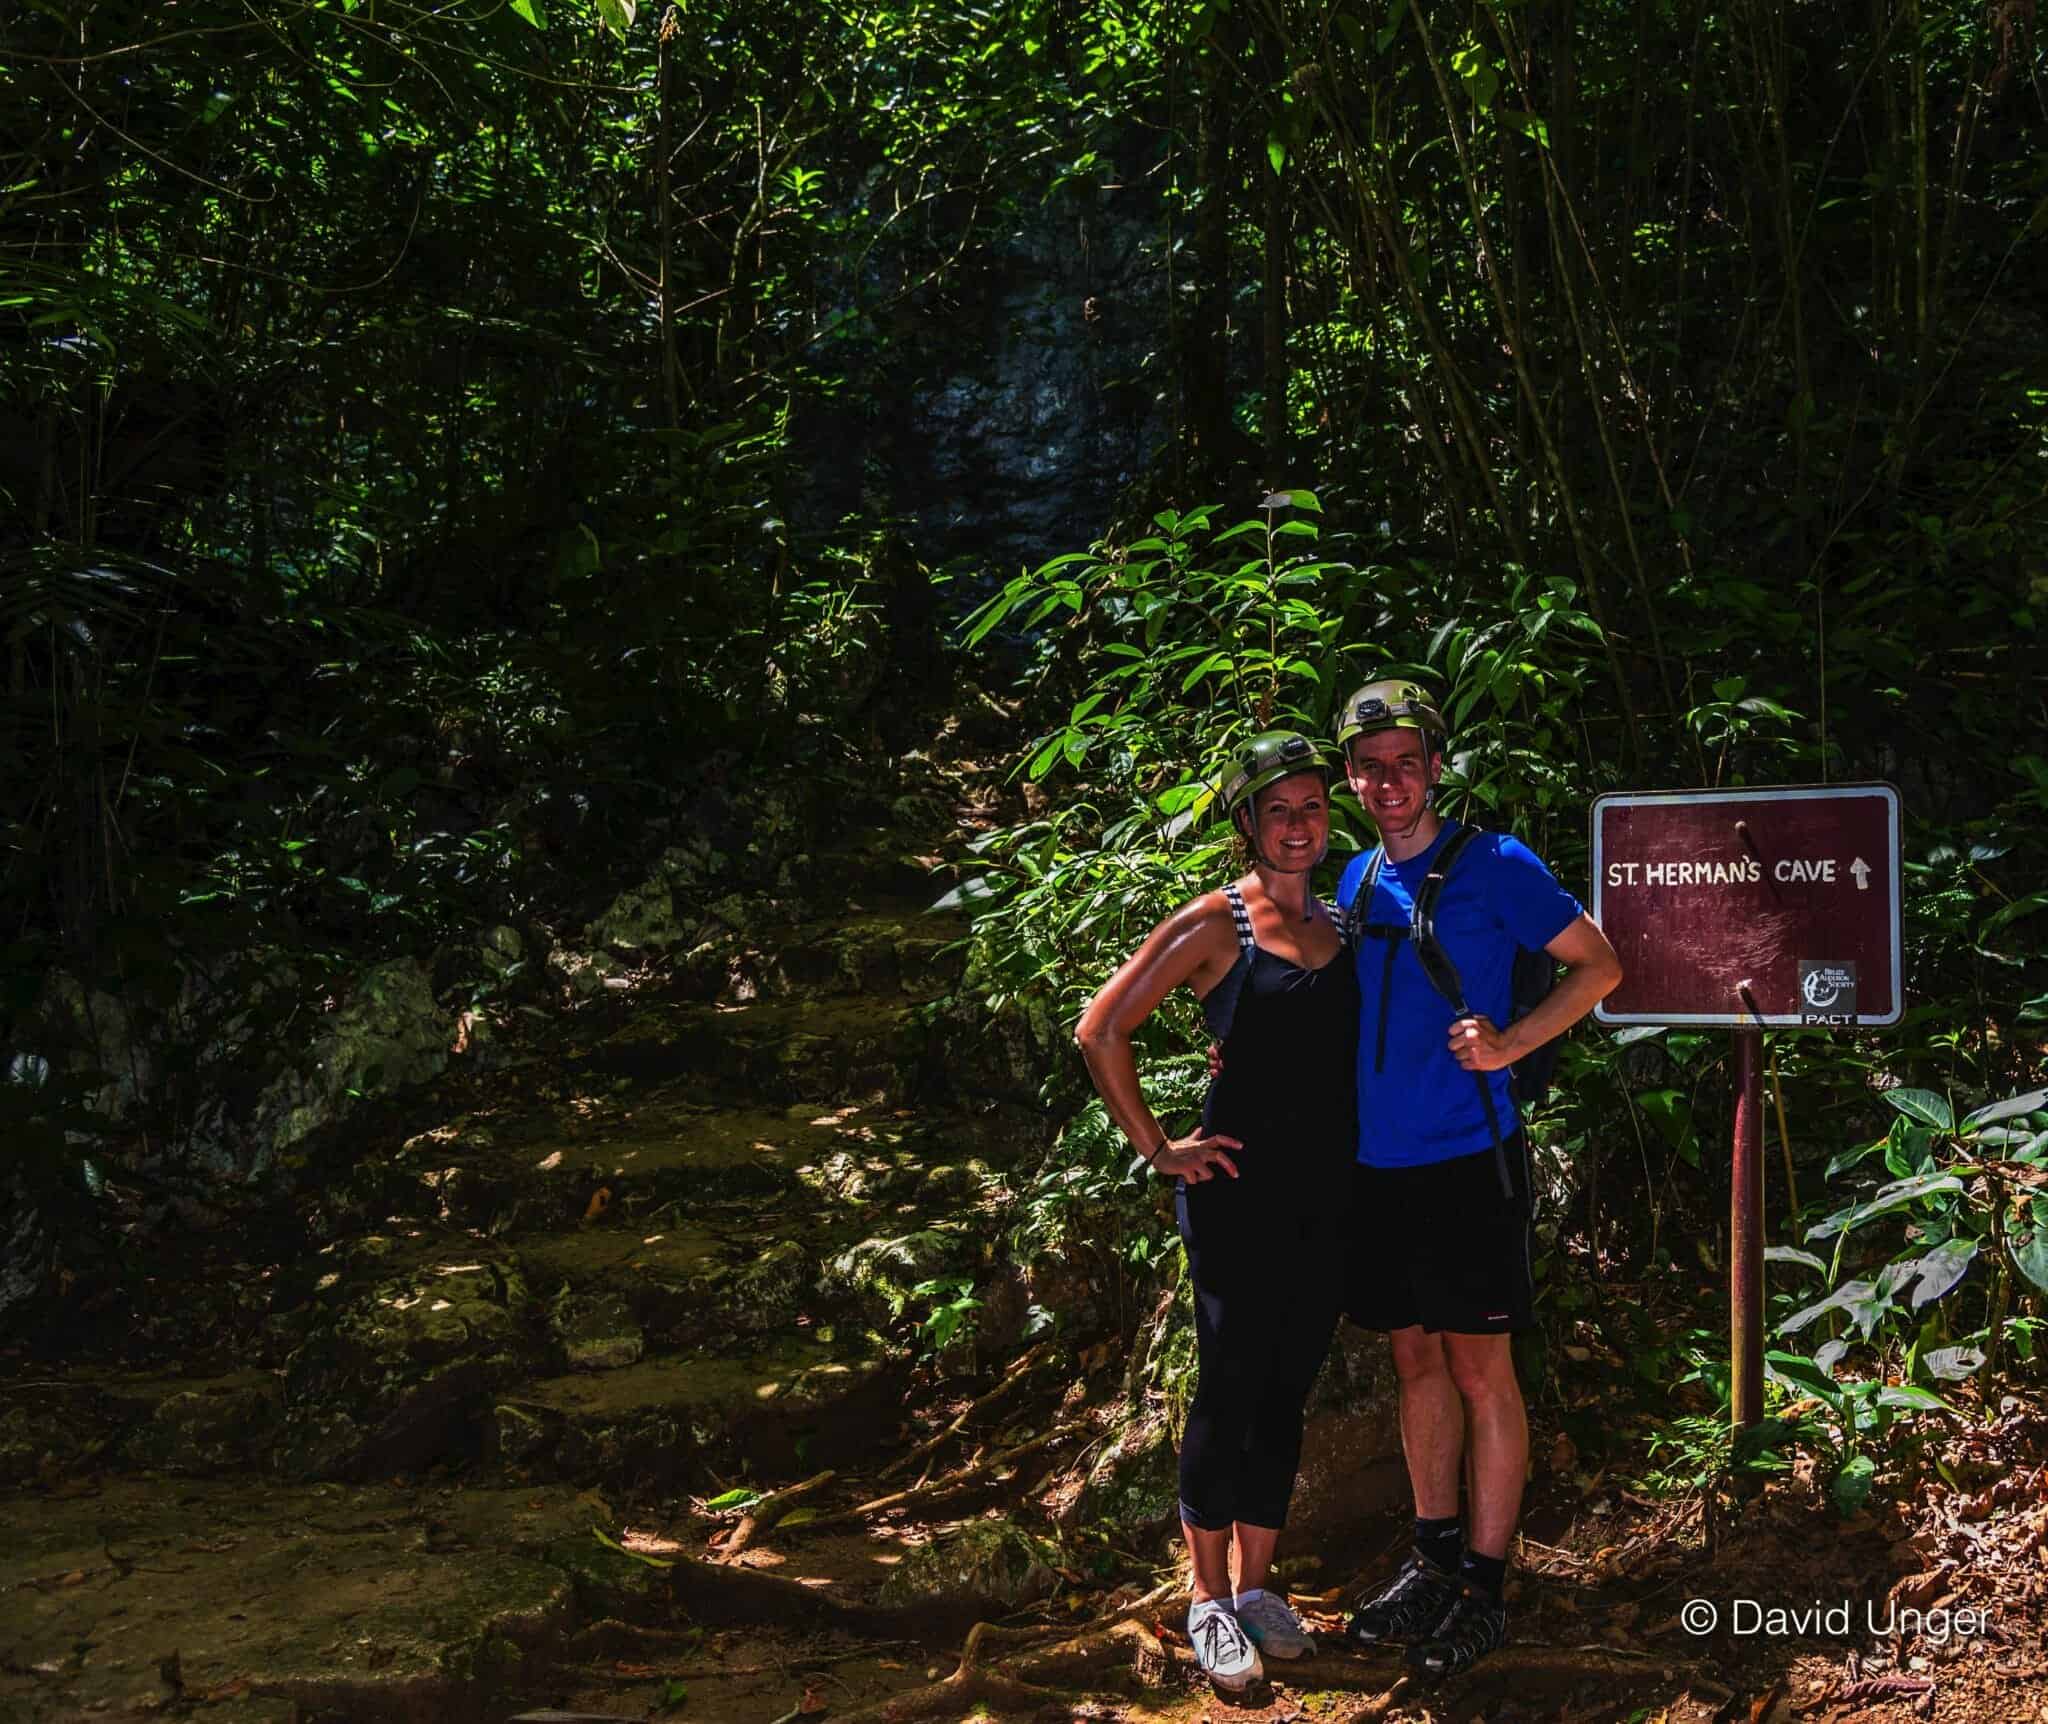 Couple with sign for St Herman's cave in Belize